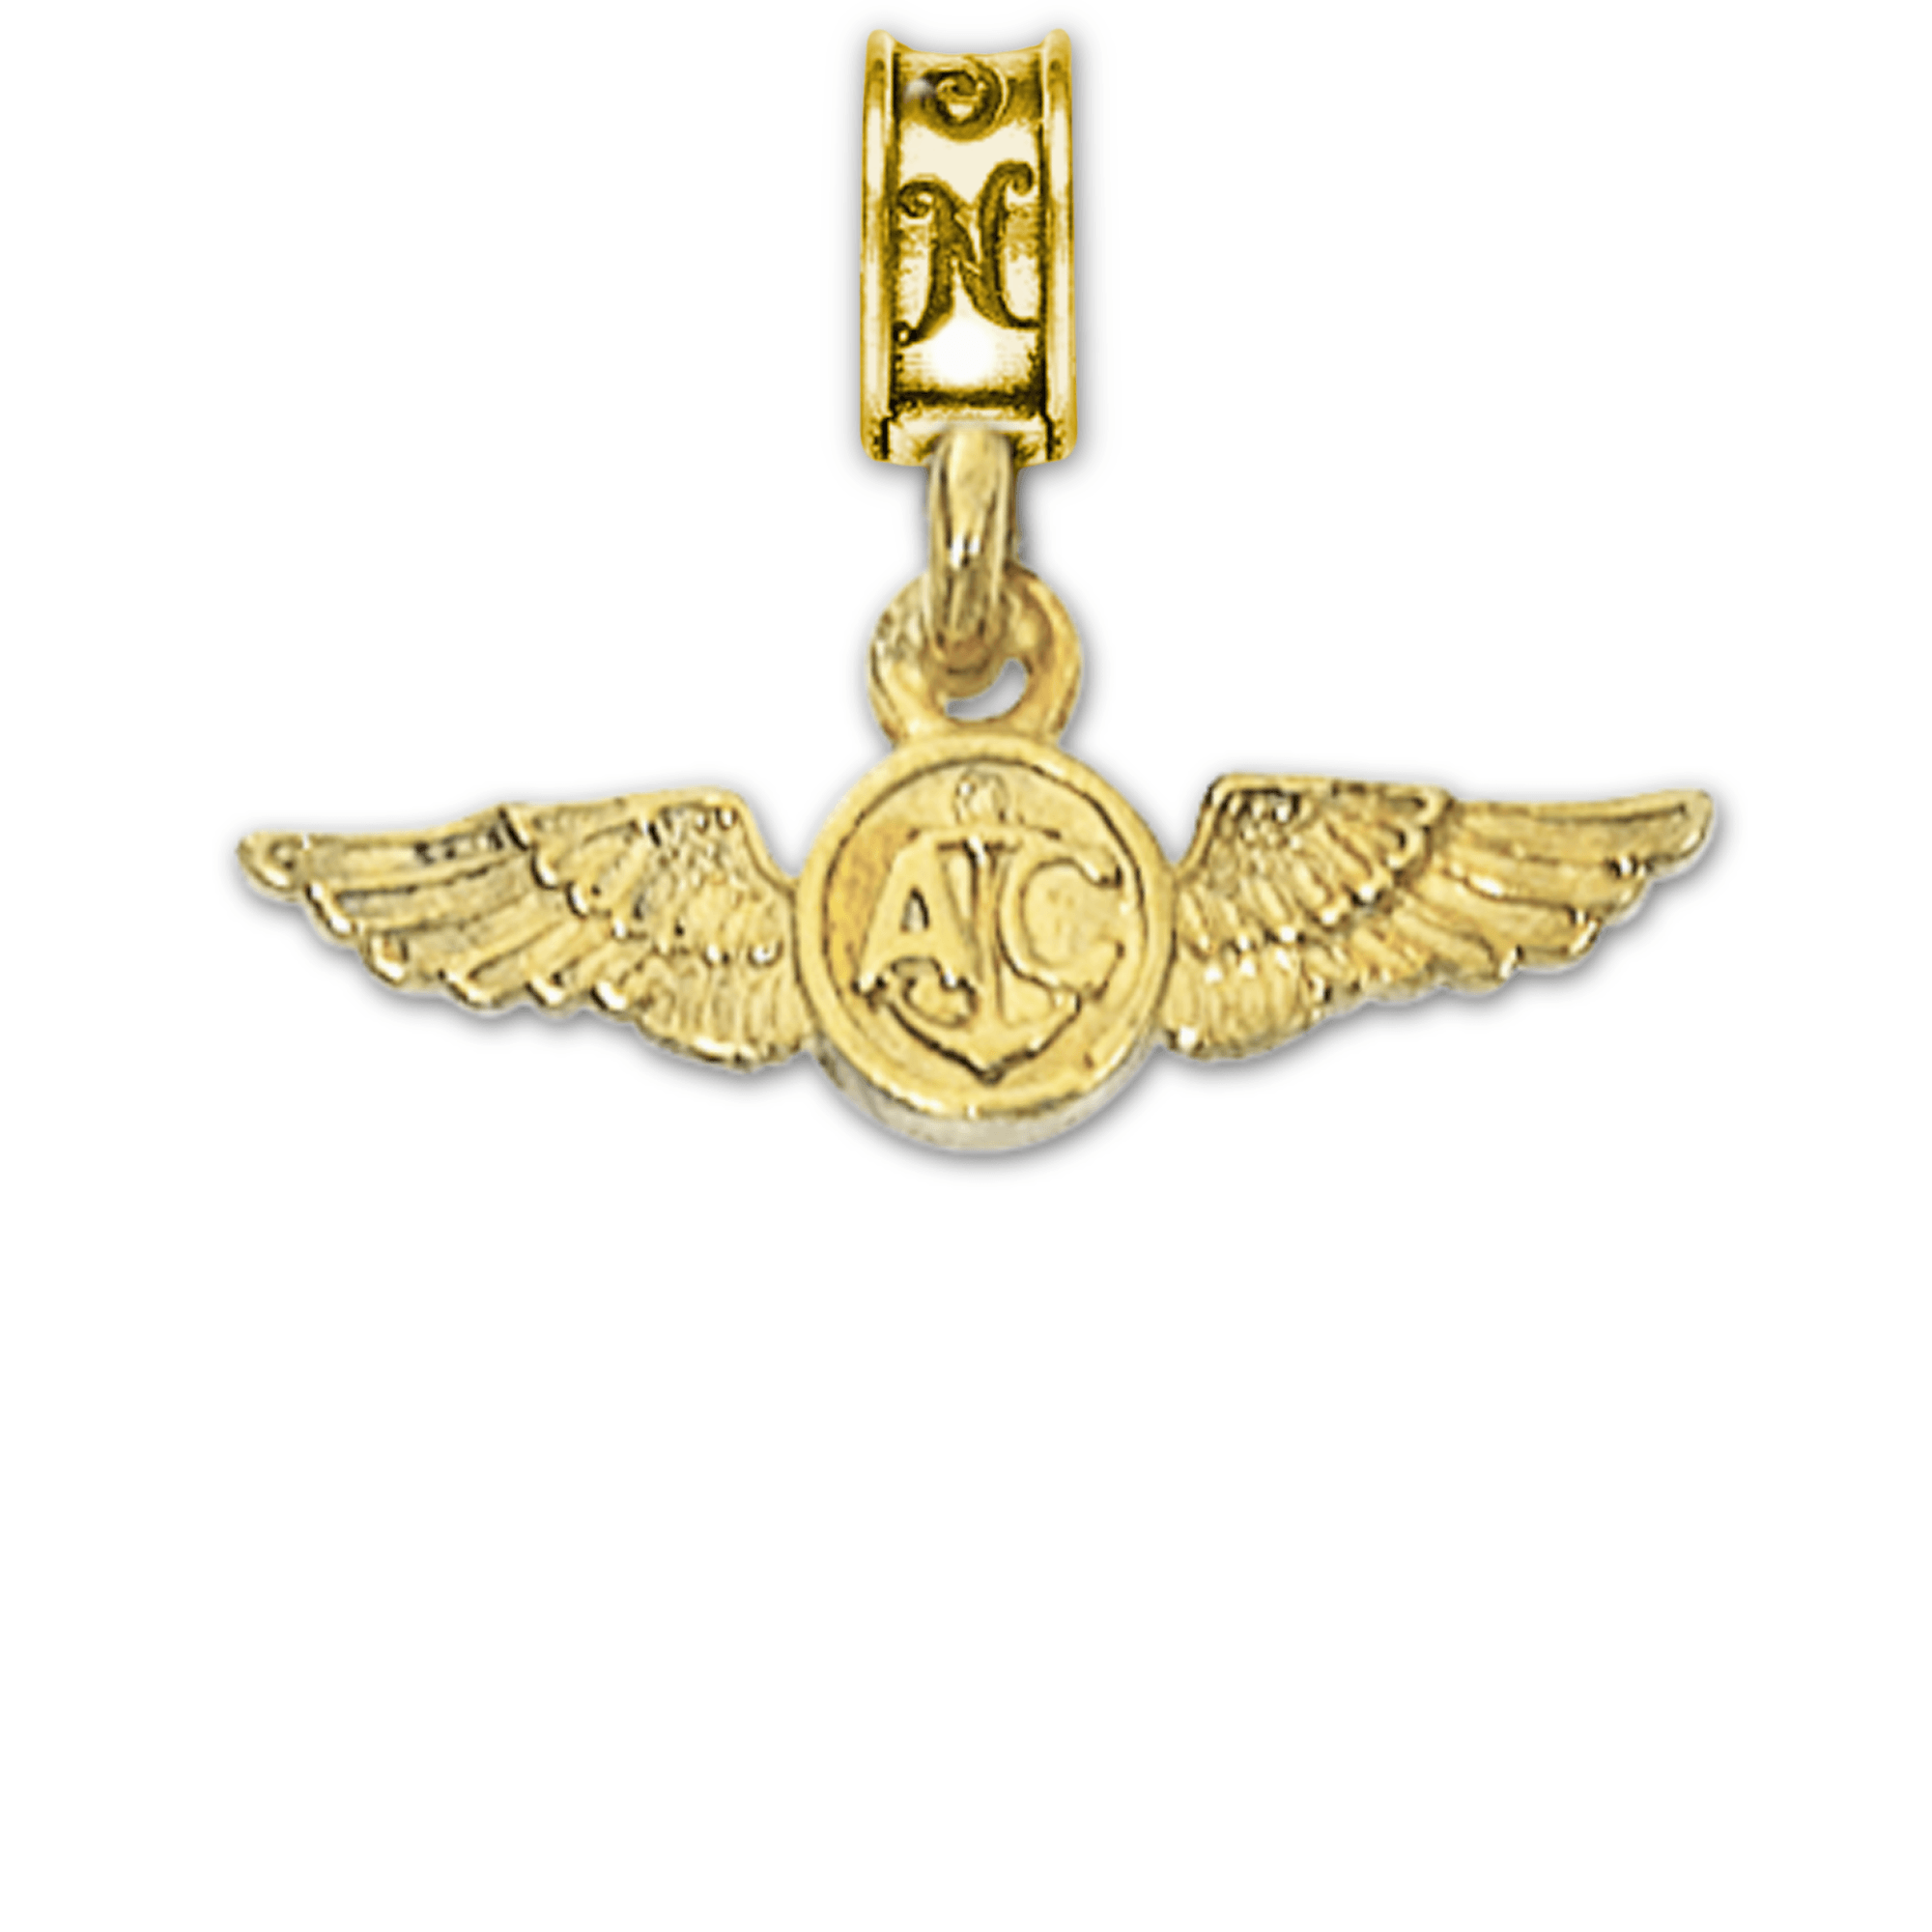 Military Jewelry, Military Charms, Navy, USN, Military Gifts, Naval Air Crew Charm gold